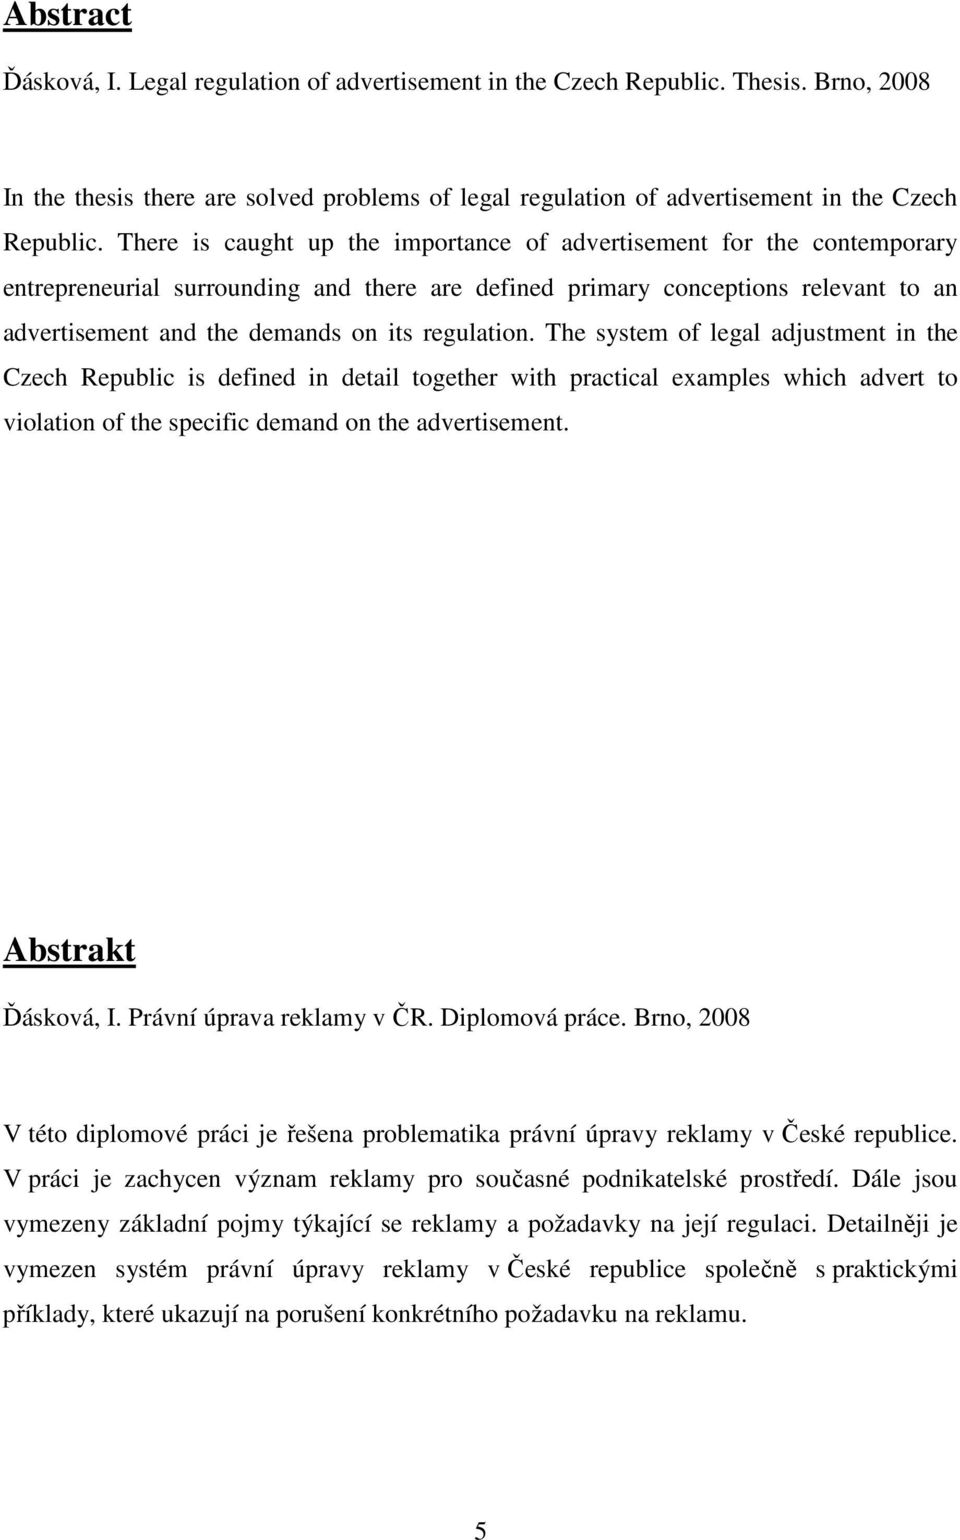 regulation. The system of legal adjustment in the Czech Republic is defined in detail together with practical examples which advert to violation of the specific demand on the advertisement.